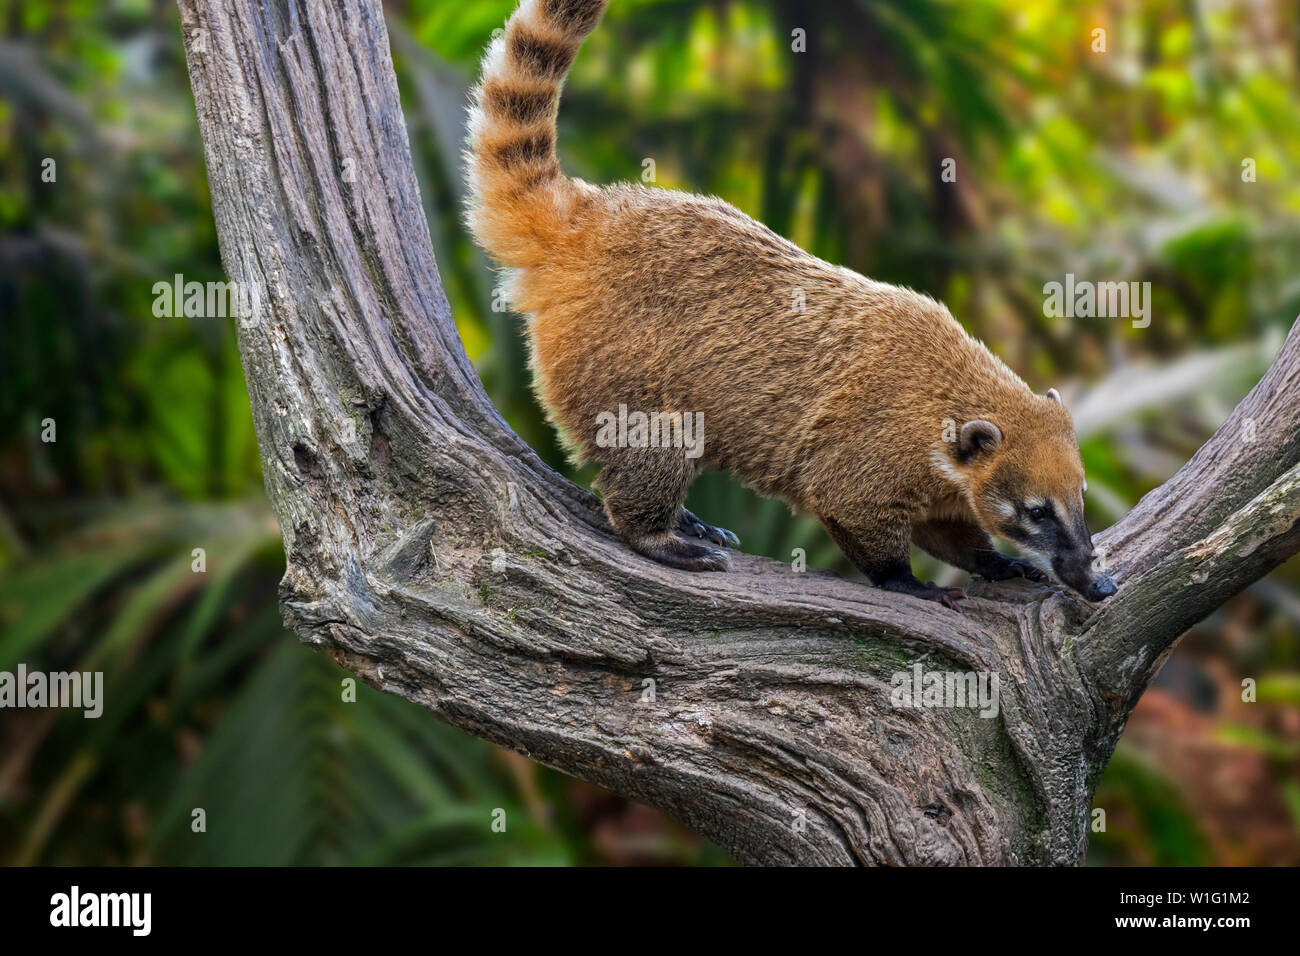 South American coati / ring-tailed coati (Nasua nasua) in tree, native to forests of tropical and subtropical South America Stock Photo